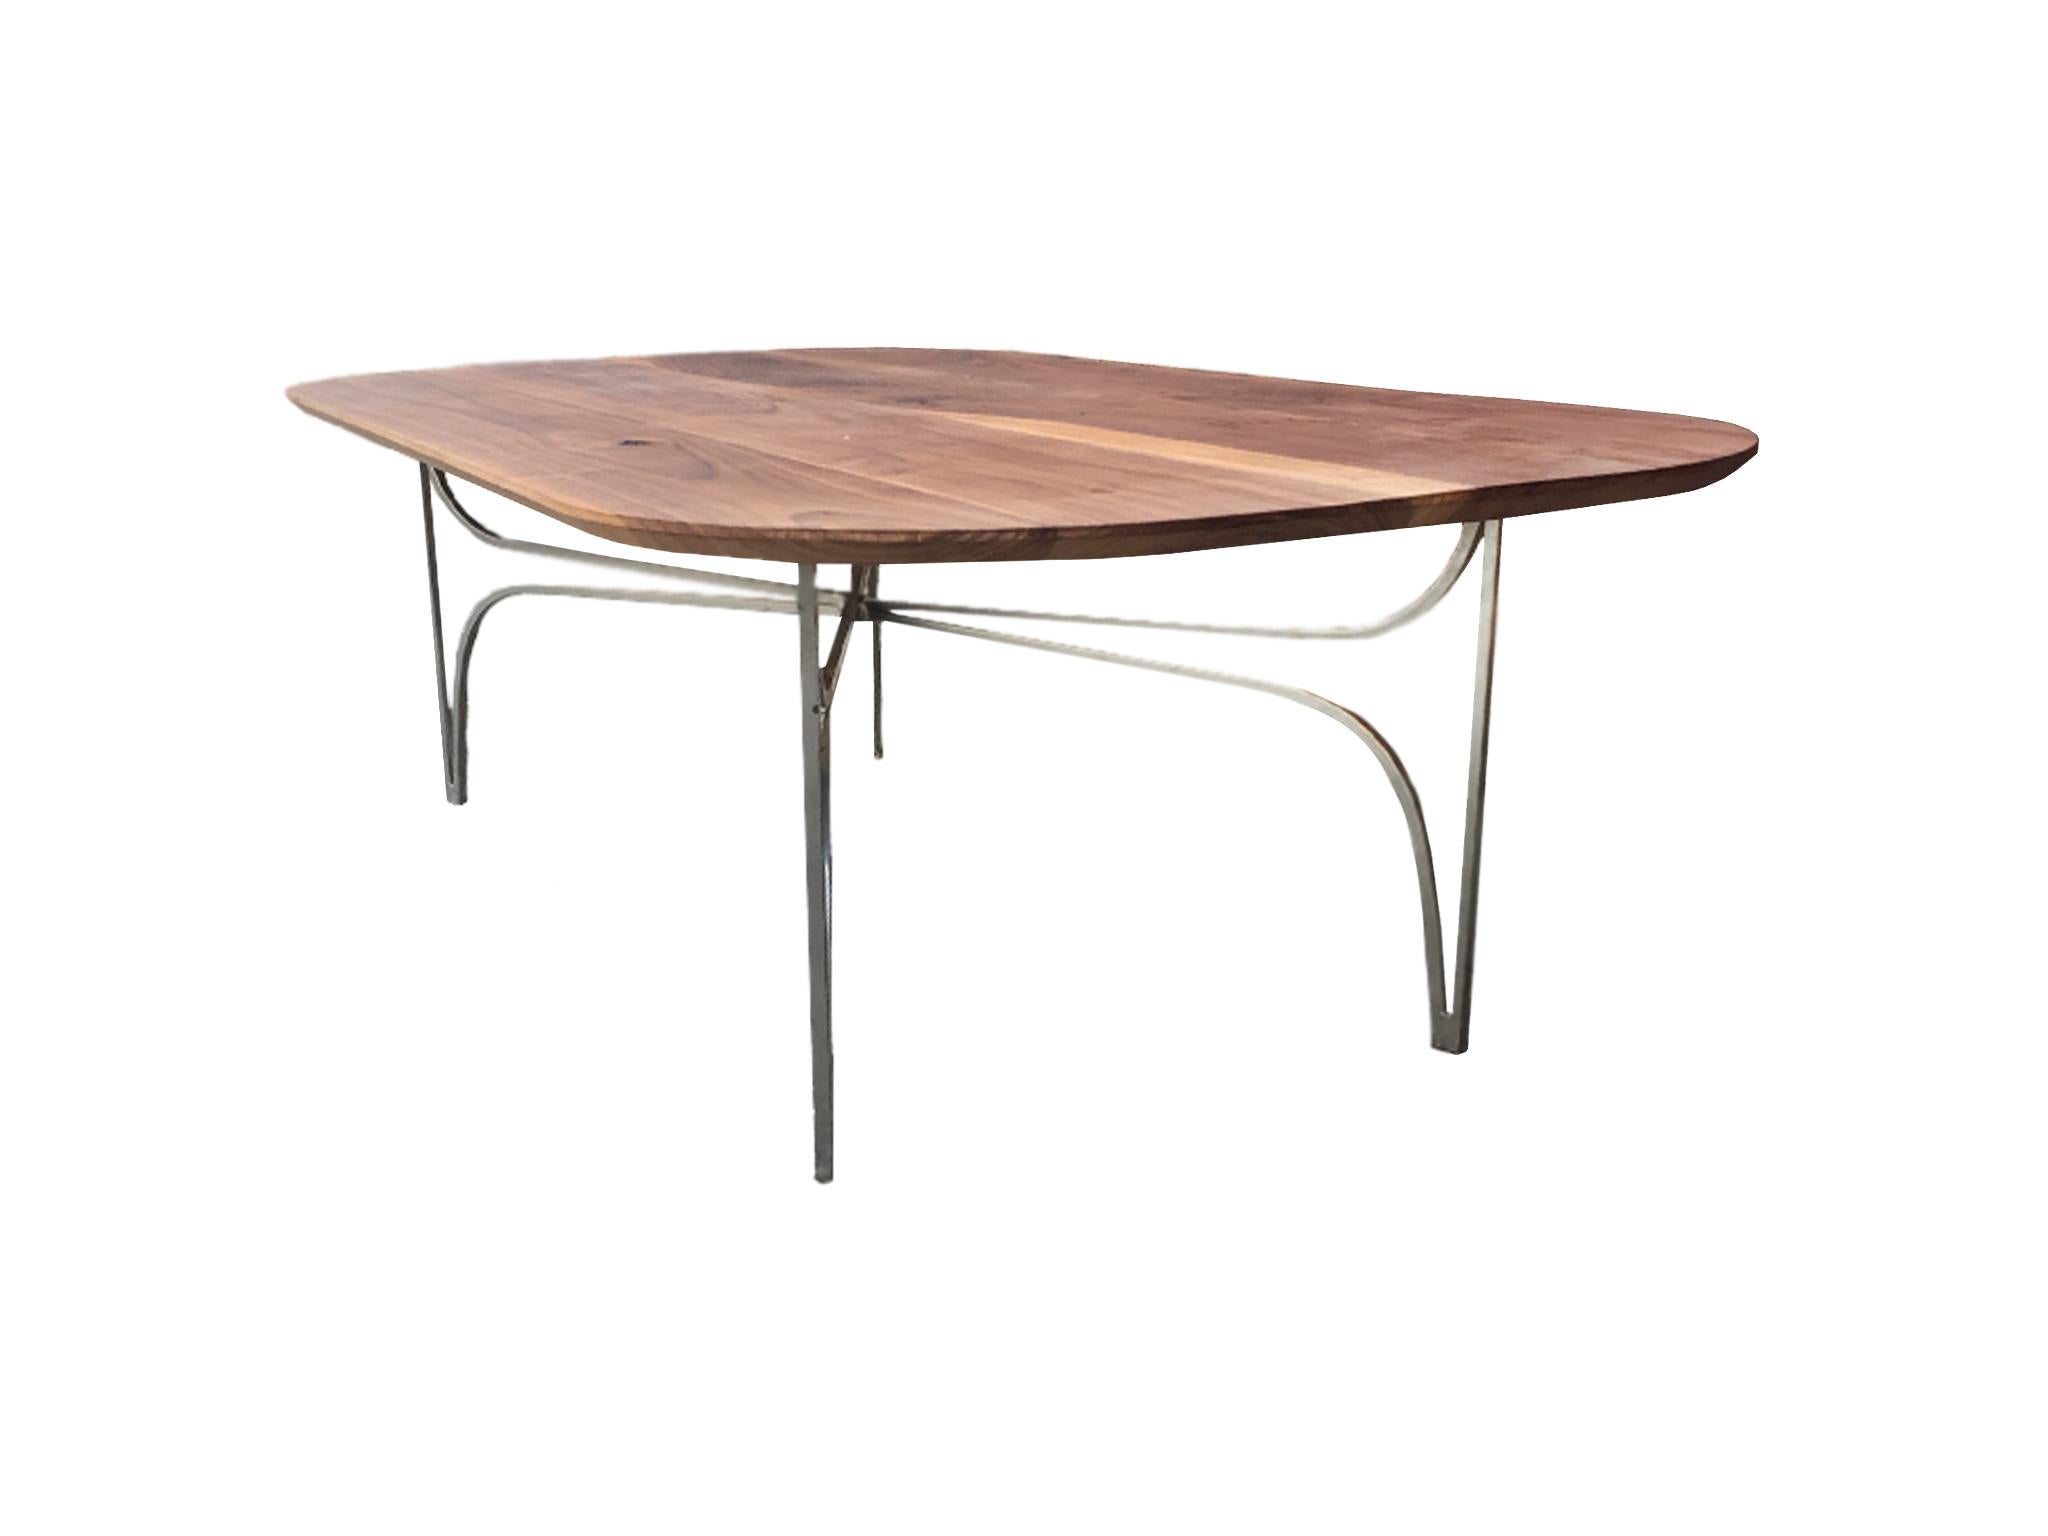 An elegant, custom made coffee table by Moni Abbasi from Hudson & Scout, a bespoke woodwork and carpentry shop. It is comprised of a vintage metal base and new walnut top handcrafted into a racetrack shape. The base is newly powder-coated. Clean,